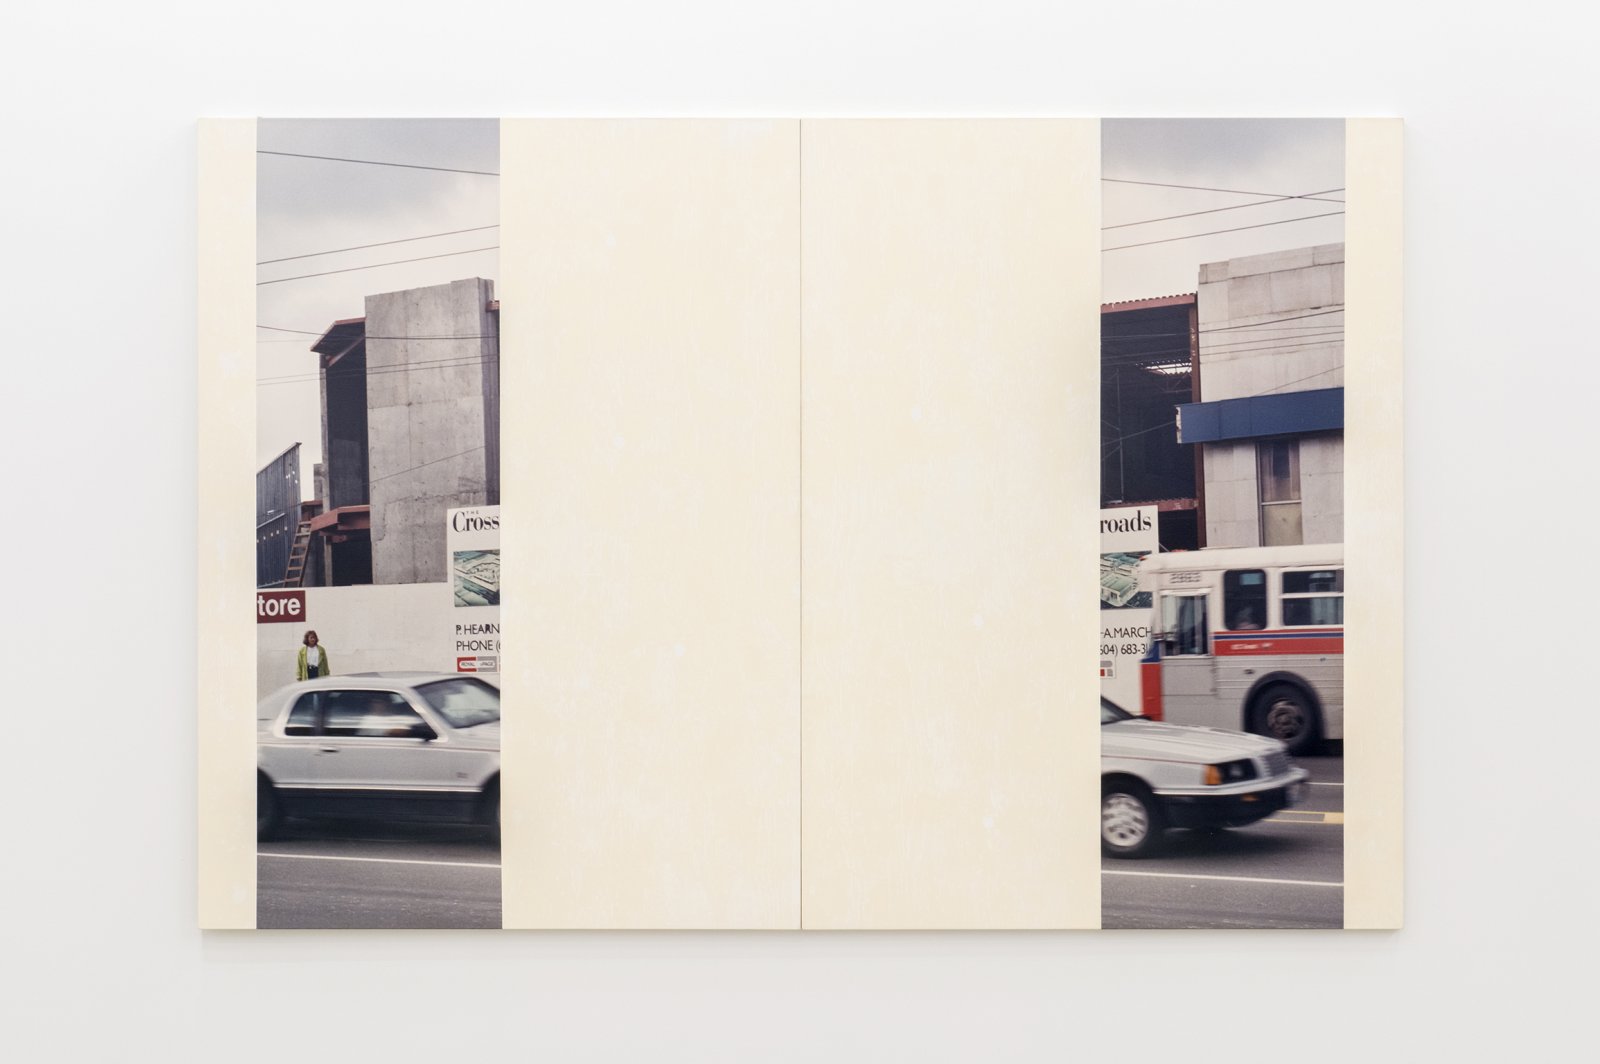 Ian Wallace, In the Street (Cologne Series IV), 1989, diptych, photolaminate with acrylic and monoprint on canvas, 80 x 120 in. (203 x 305 cm)